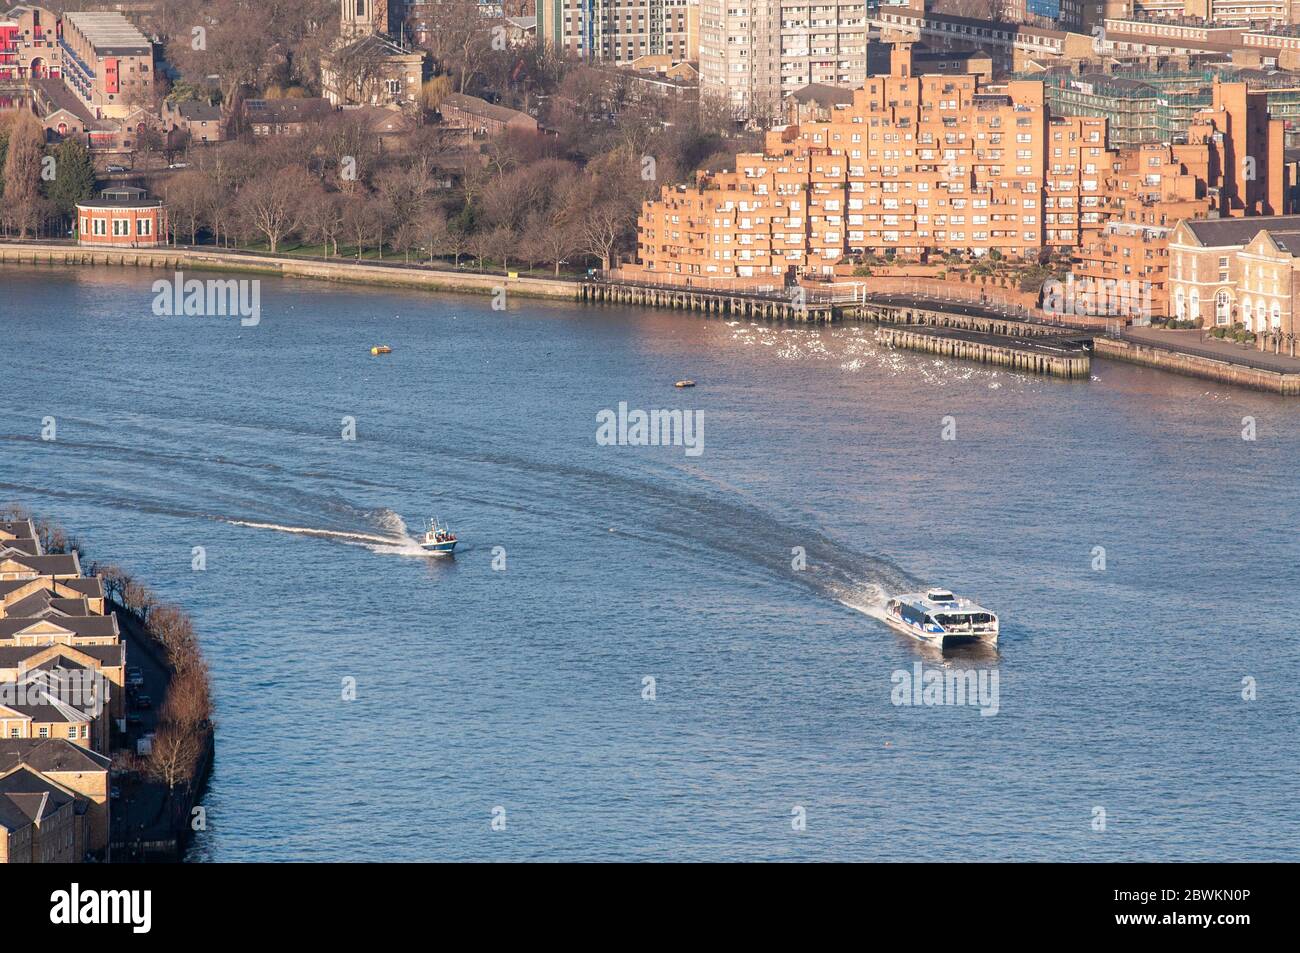 London, England, UK - February 27, 2015: A Thames Clipper ferry and speed boat travel along the River Thames past Wapping and Rotherhithe in East Lond Stock Photo